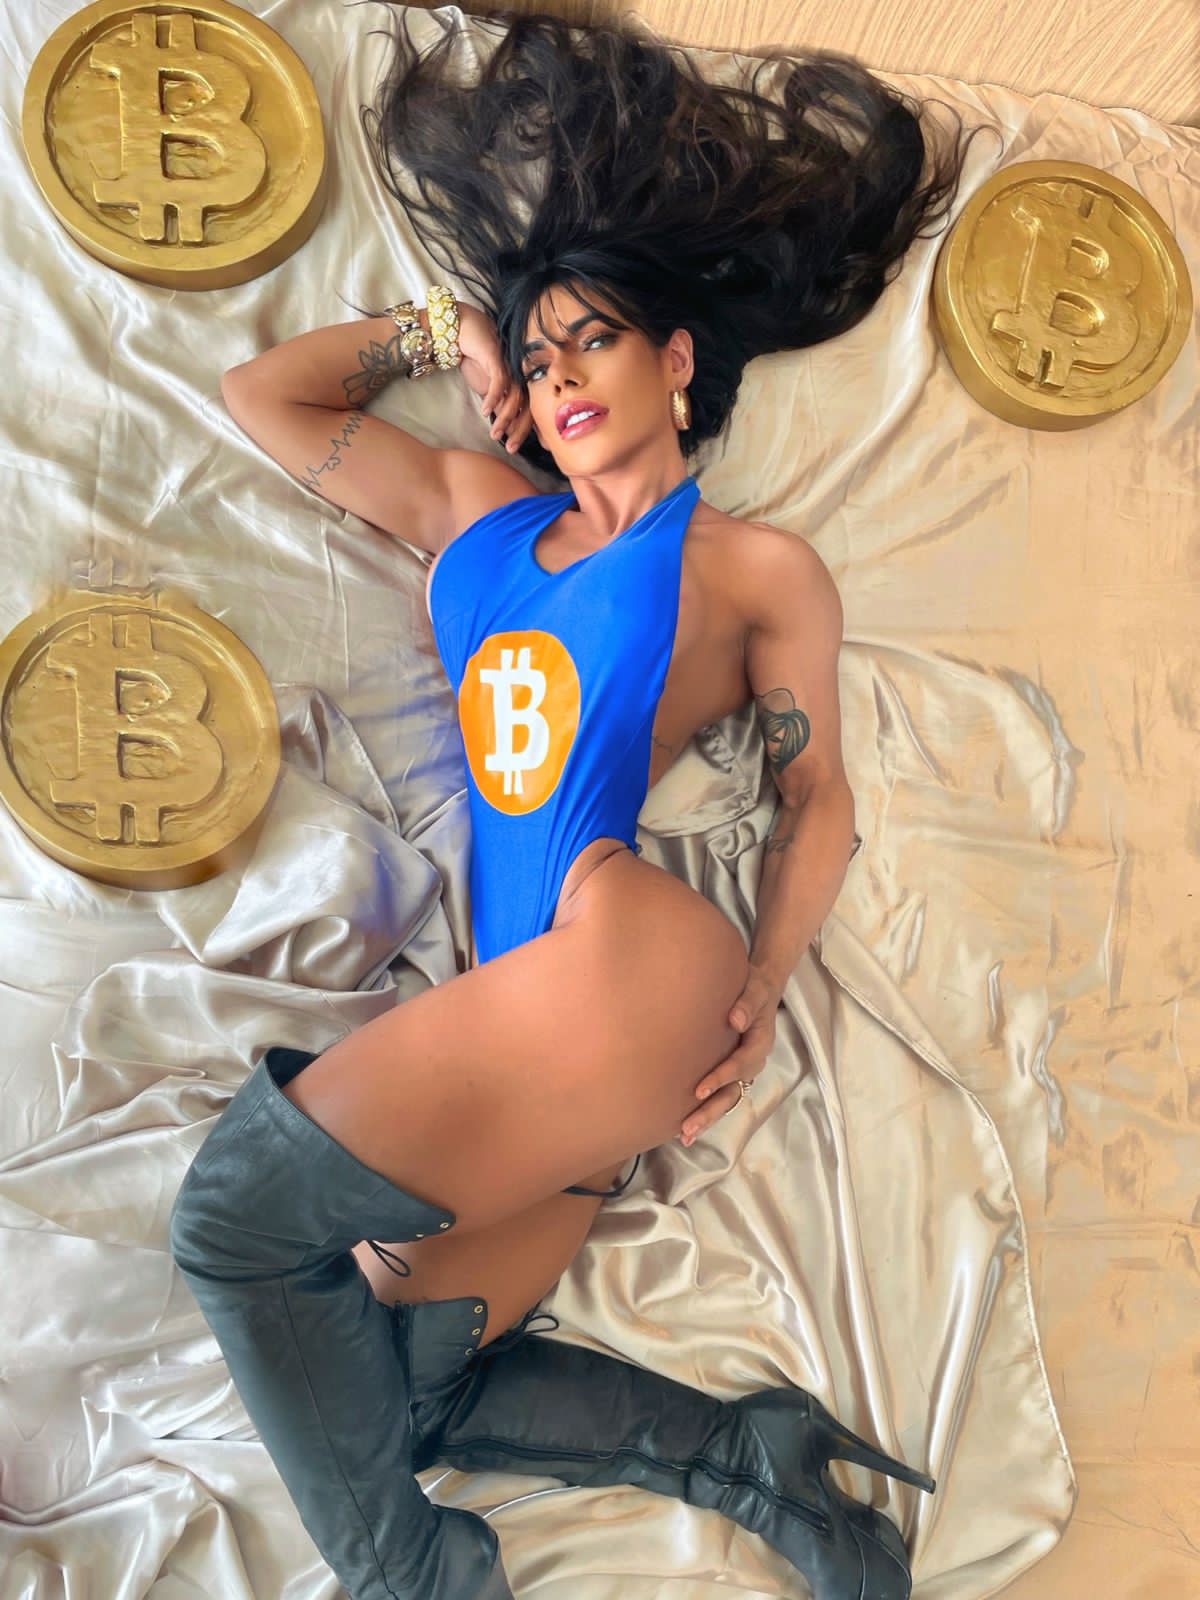 Today Miss BumBum Suzy Cortez is Also Known as Crypto Queen!